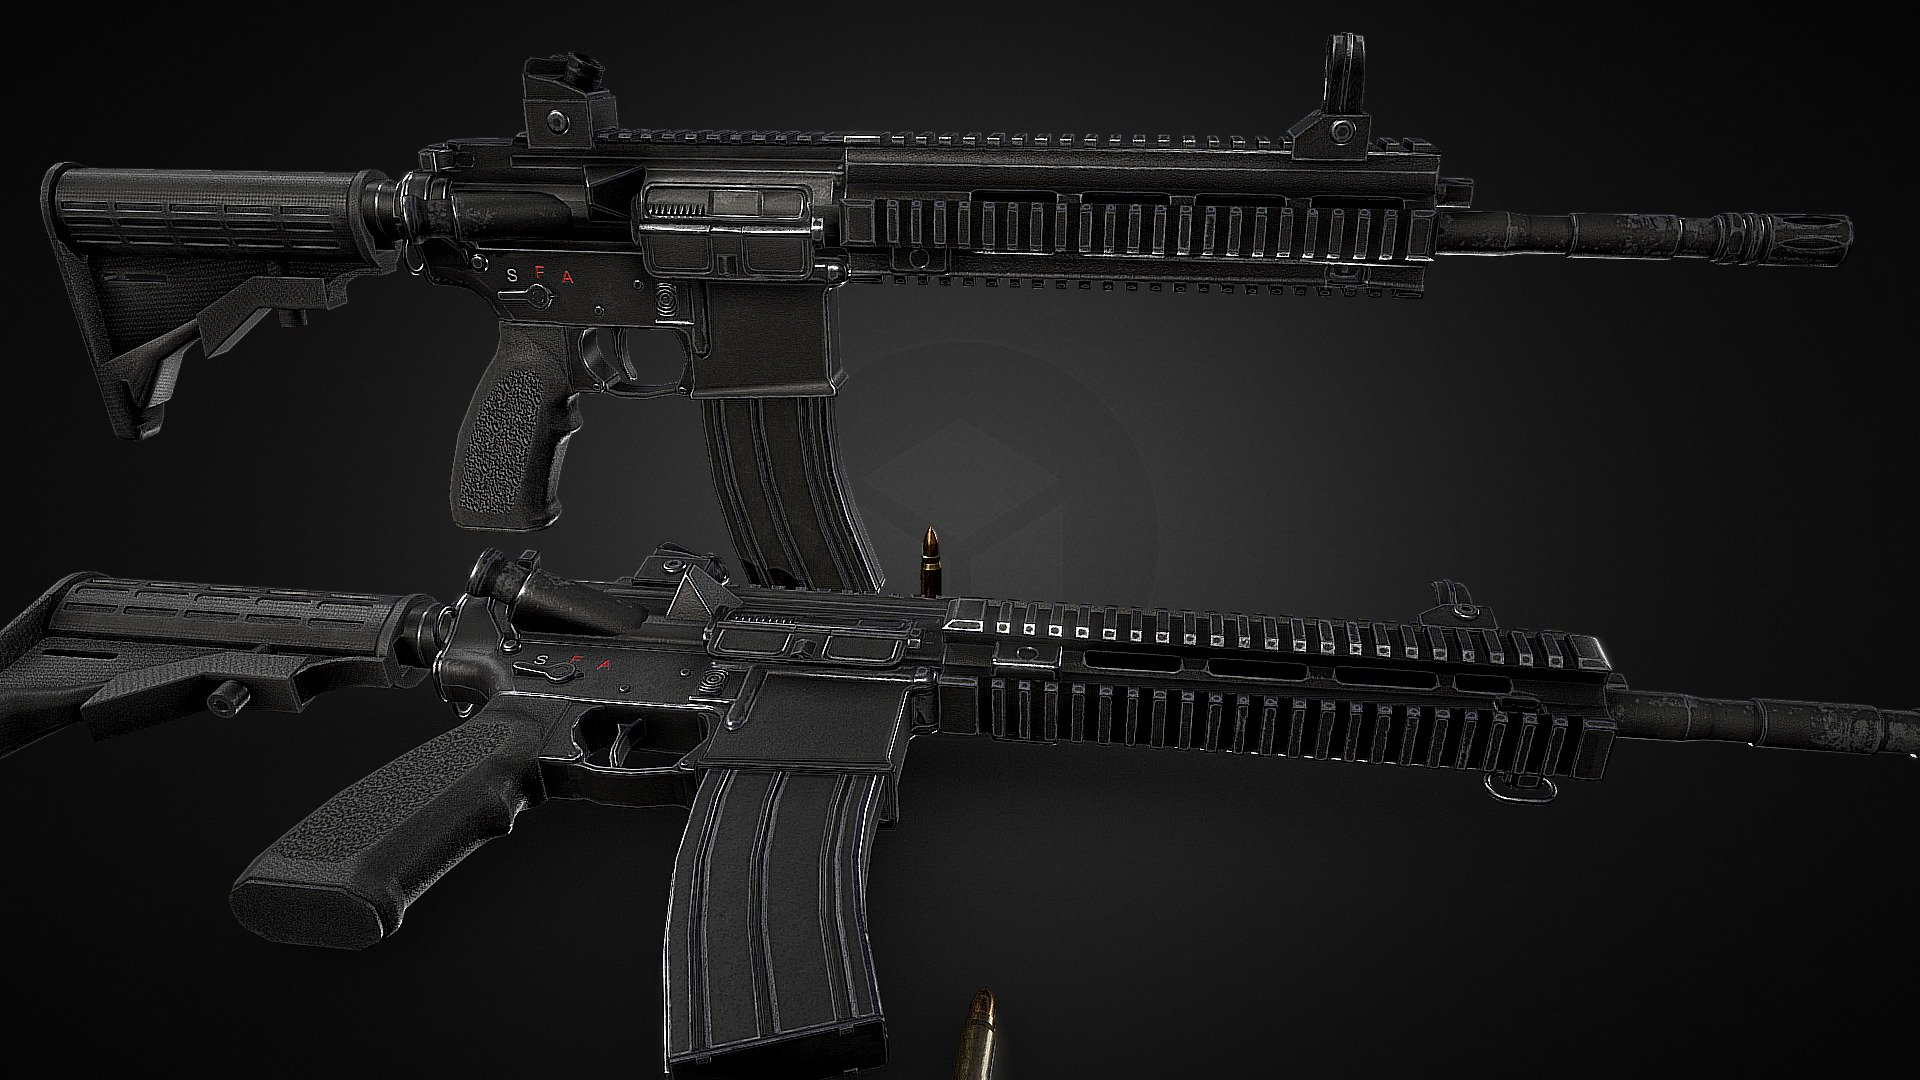 HK416 Rifles

Features:




4K Textures

Textures:




Normal

Rough

Metal

Diffuse

I made this 3d weapon model for any artist who wants a cool gun for their character renders, game or to reskin. The download comes with a thank you message attached to it and features hd textures in high quality PNG and detailed models in blender and fbx format 3d model